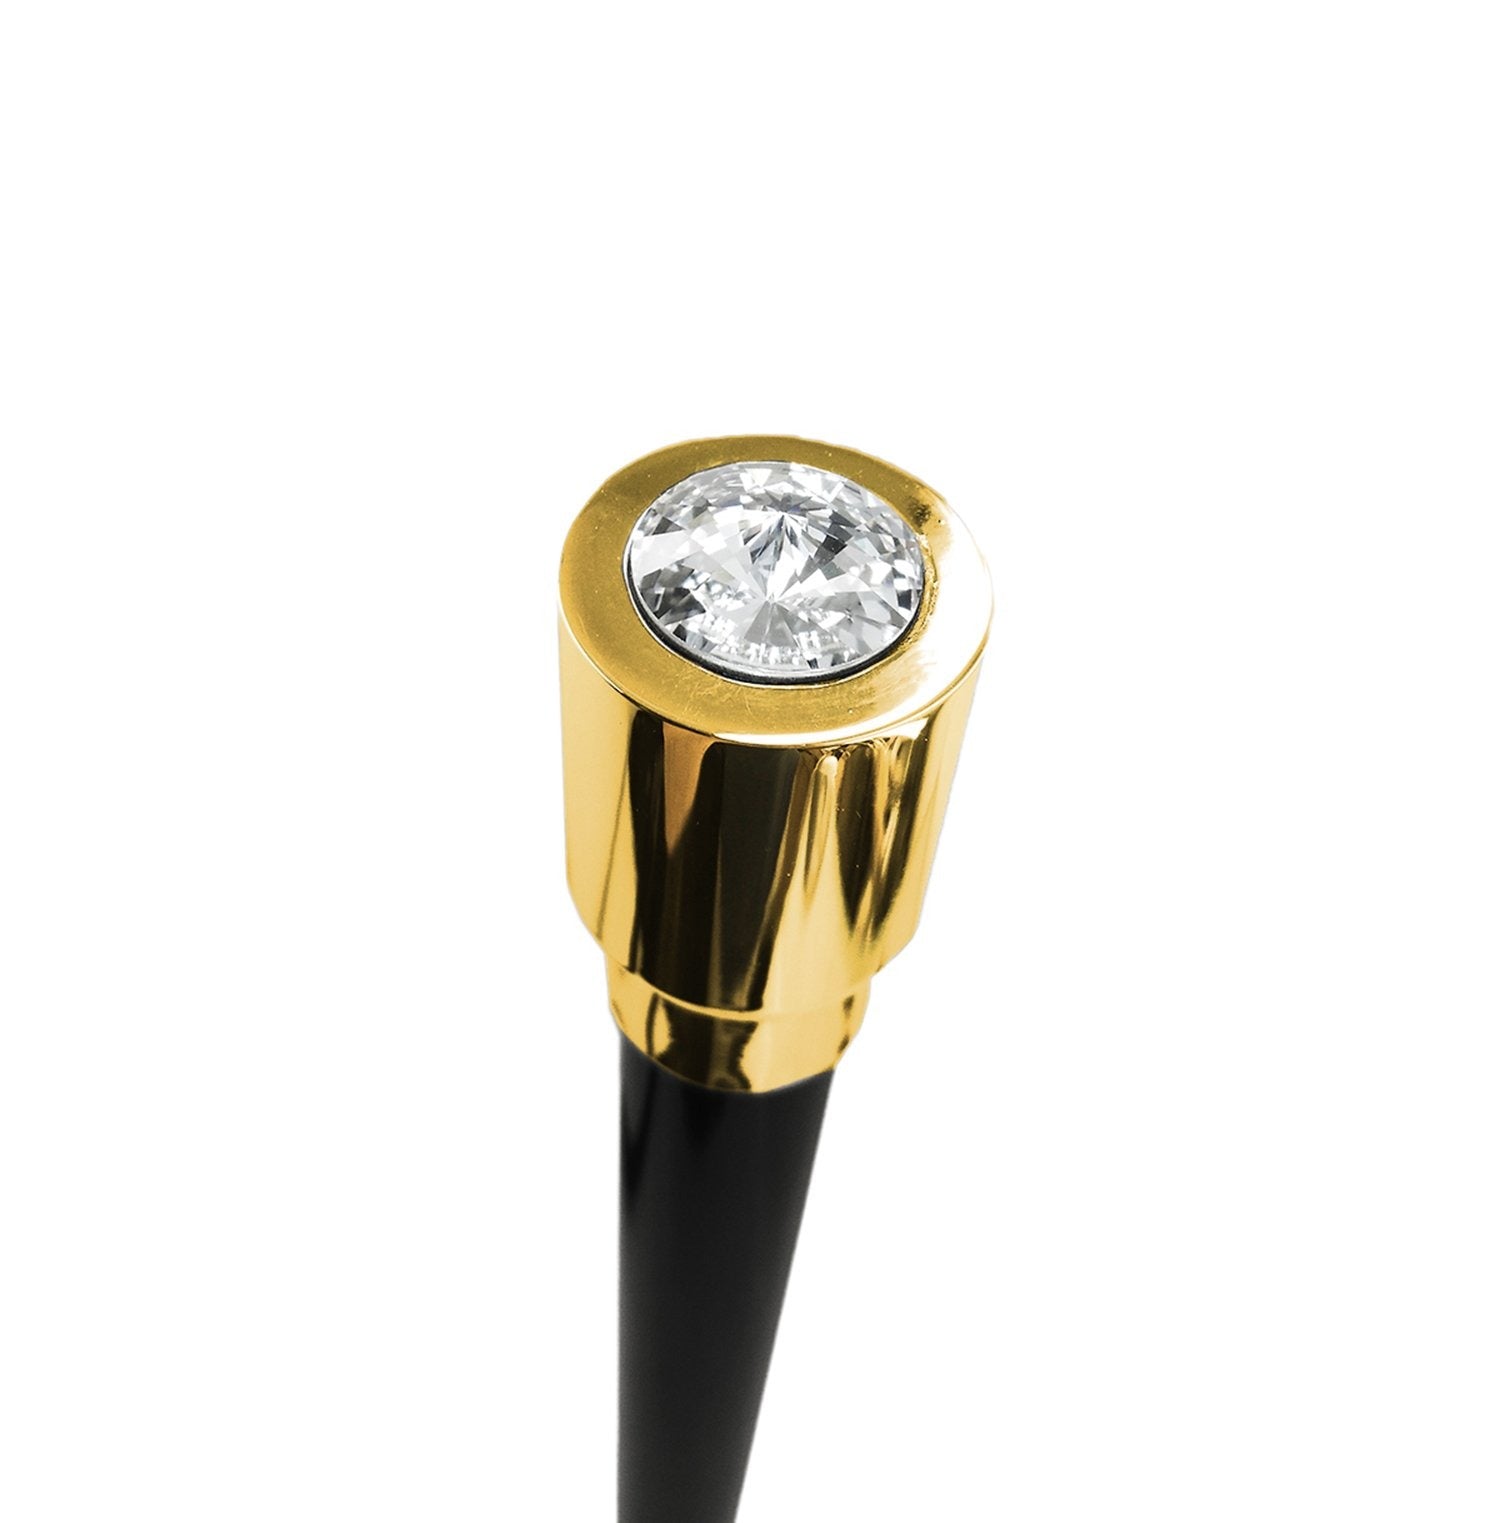 Luxurious 24K goldplated Walking Stick for Ceremonies - IL MARCHESATO LUXURY UMBRELLAS, CANES AND SHOEHORNS